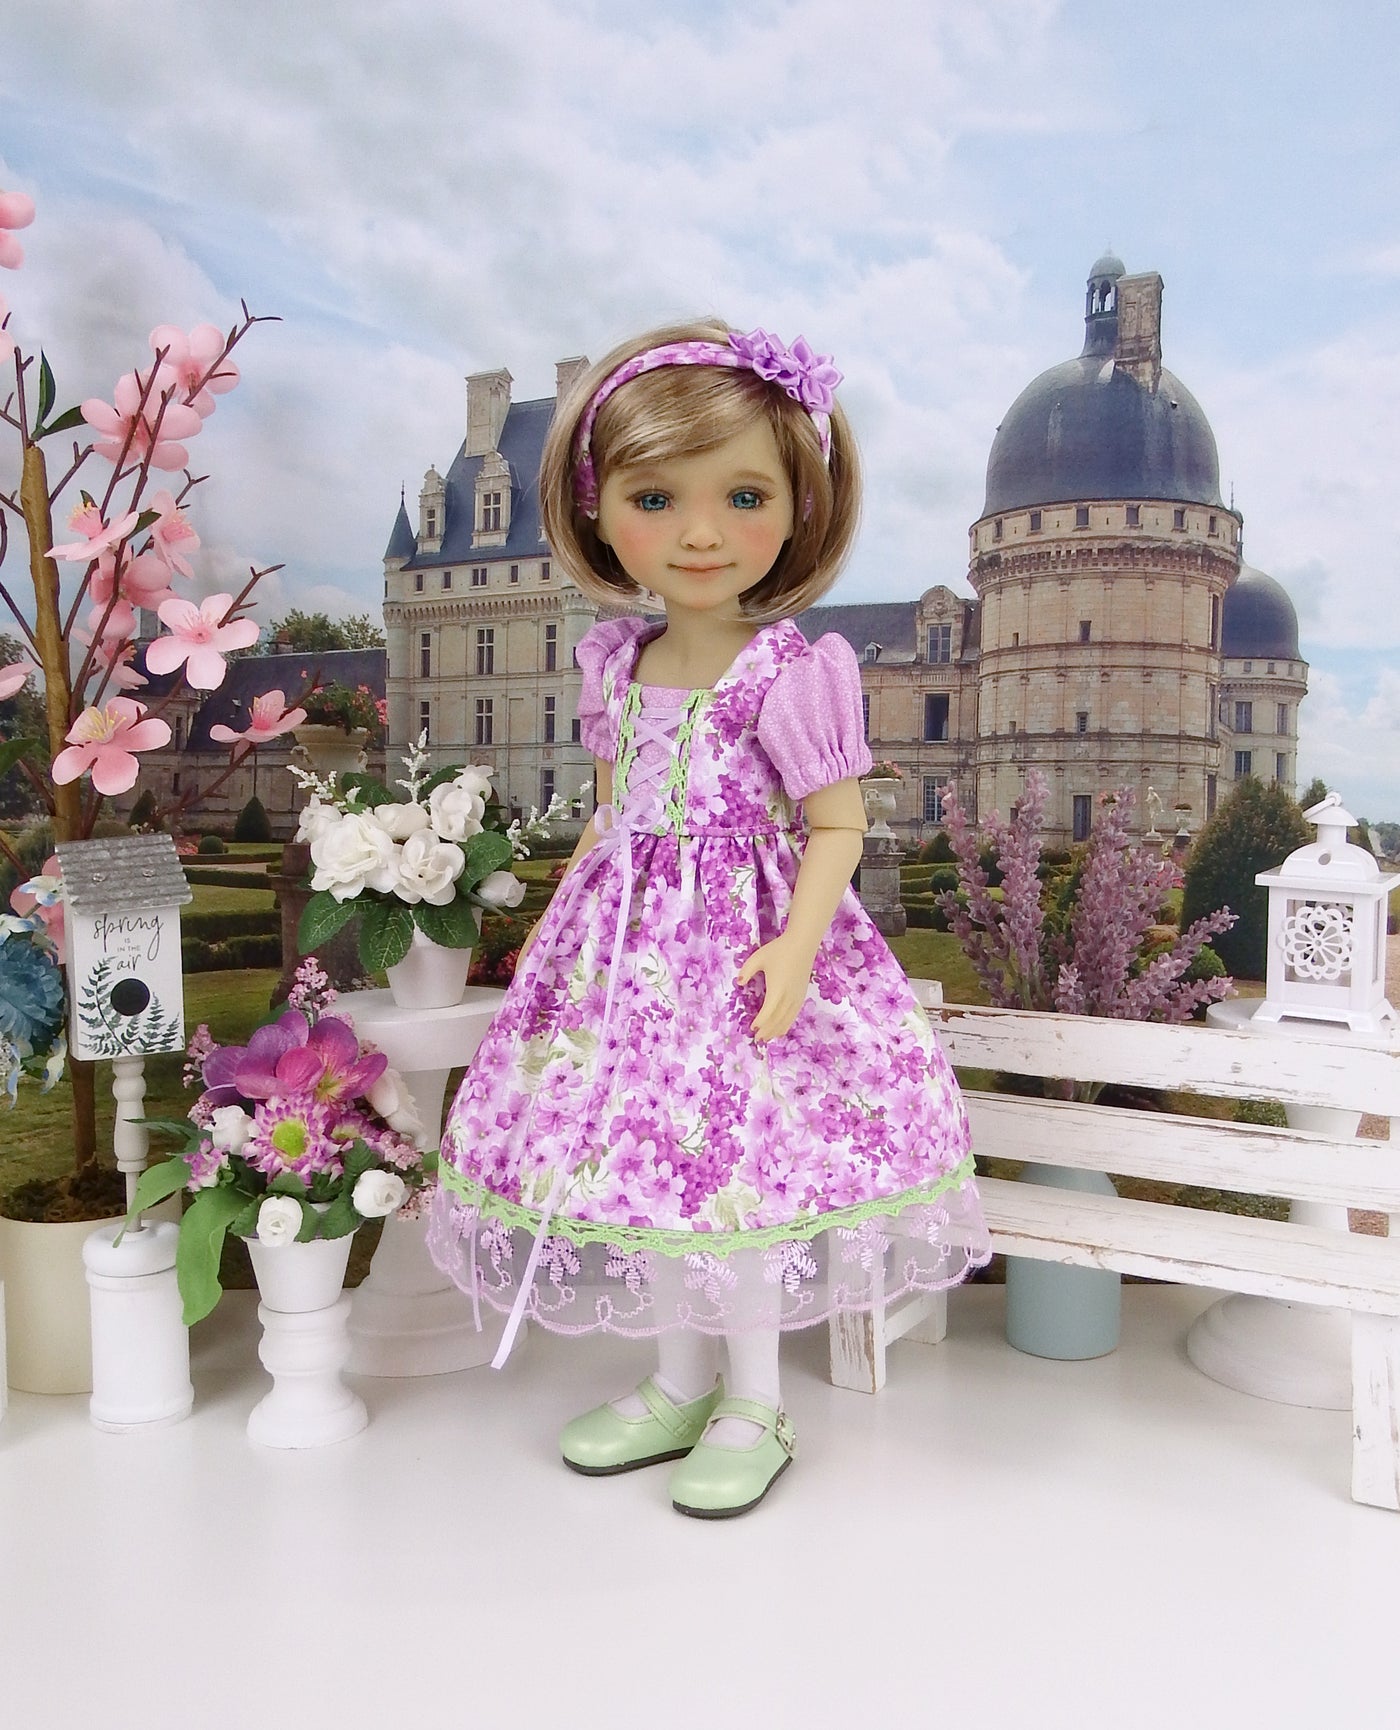 Alpine Geranium - dress ensemble with shoes for Ruby Red Fashion Friends doll